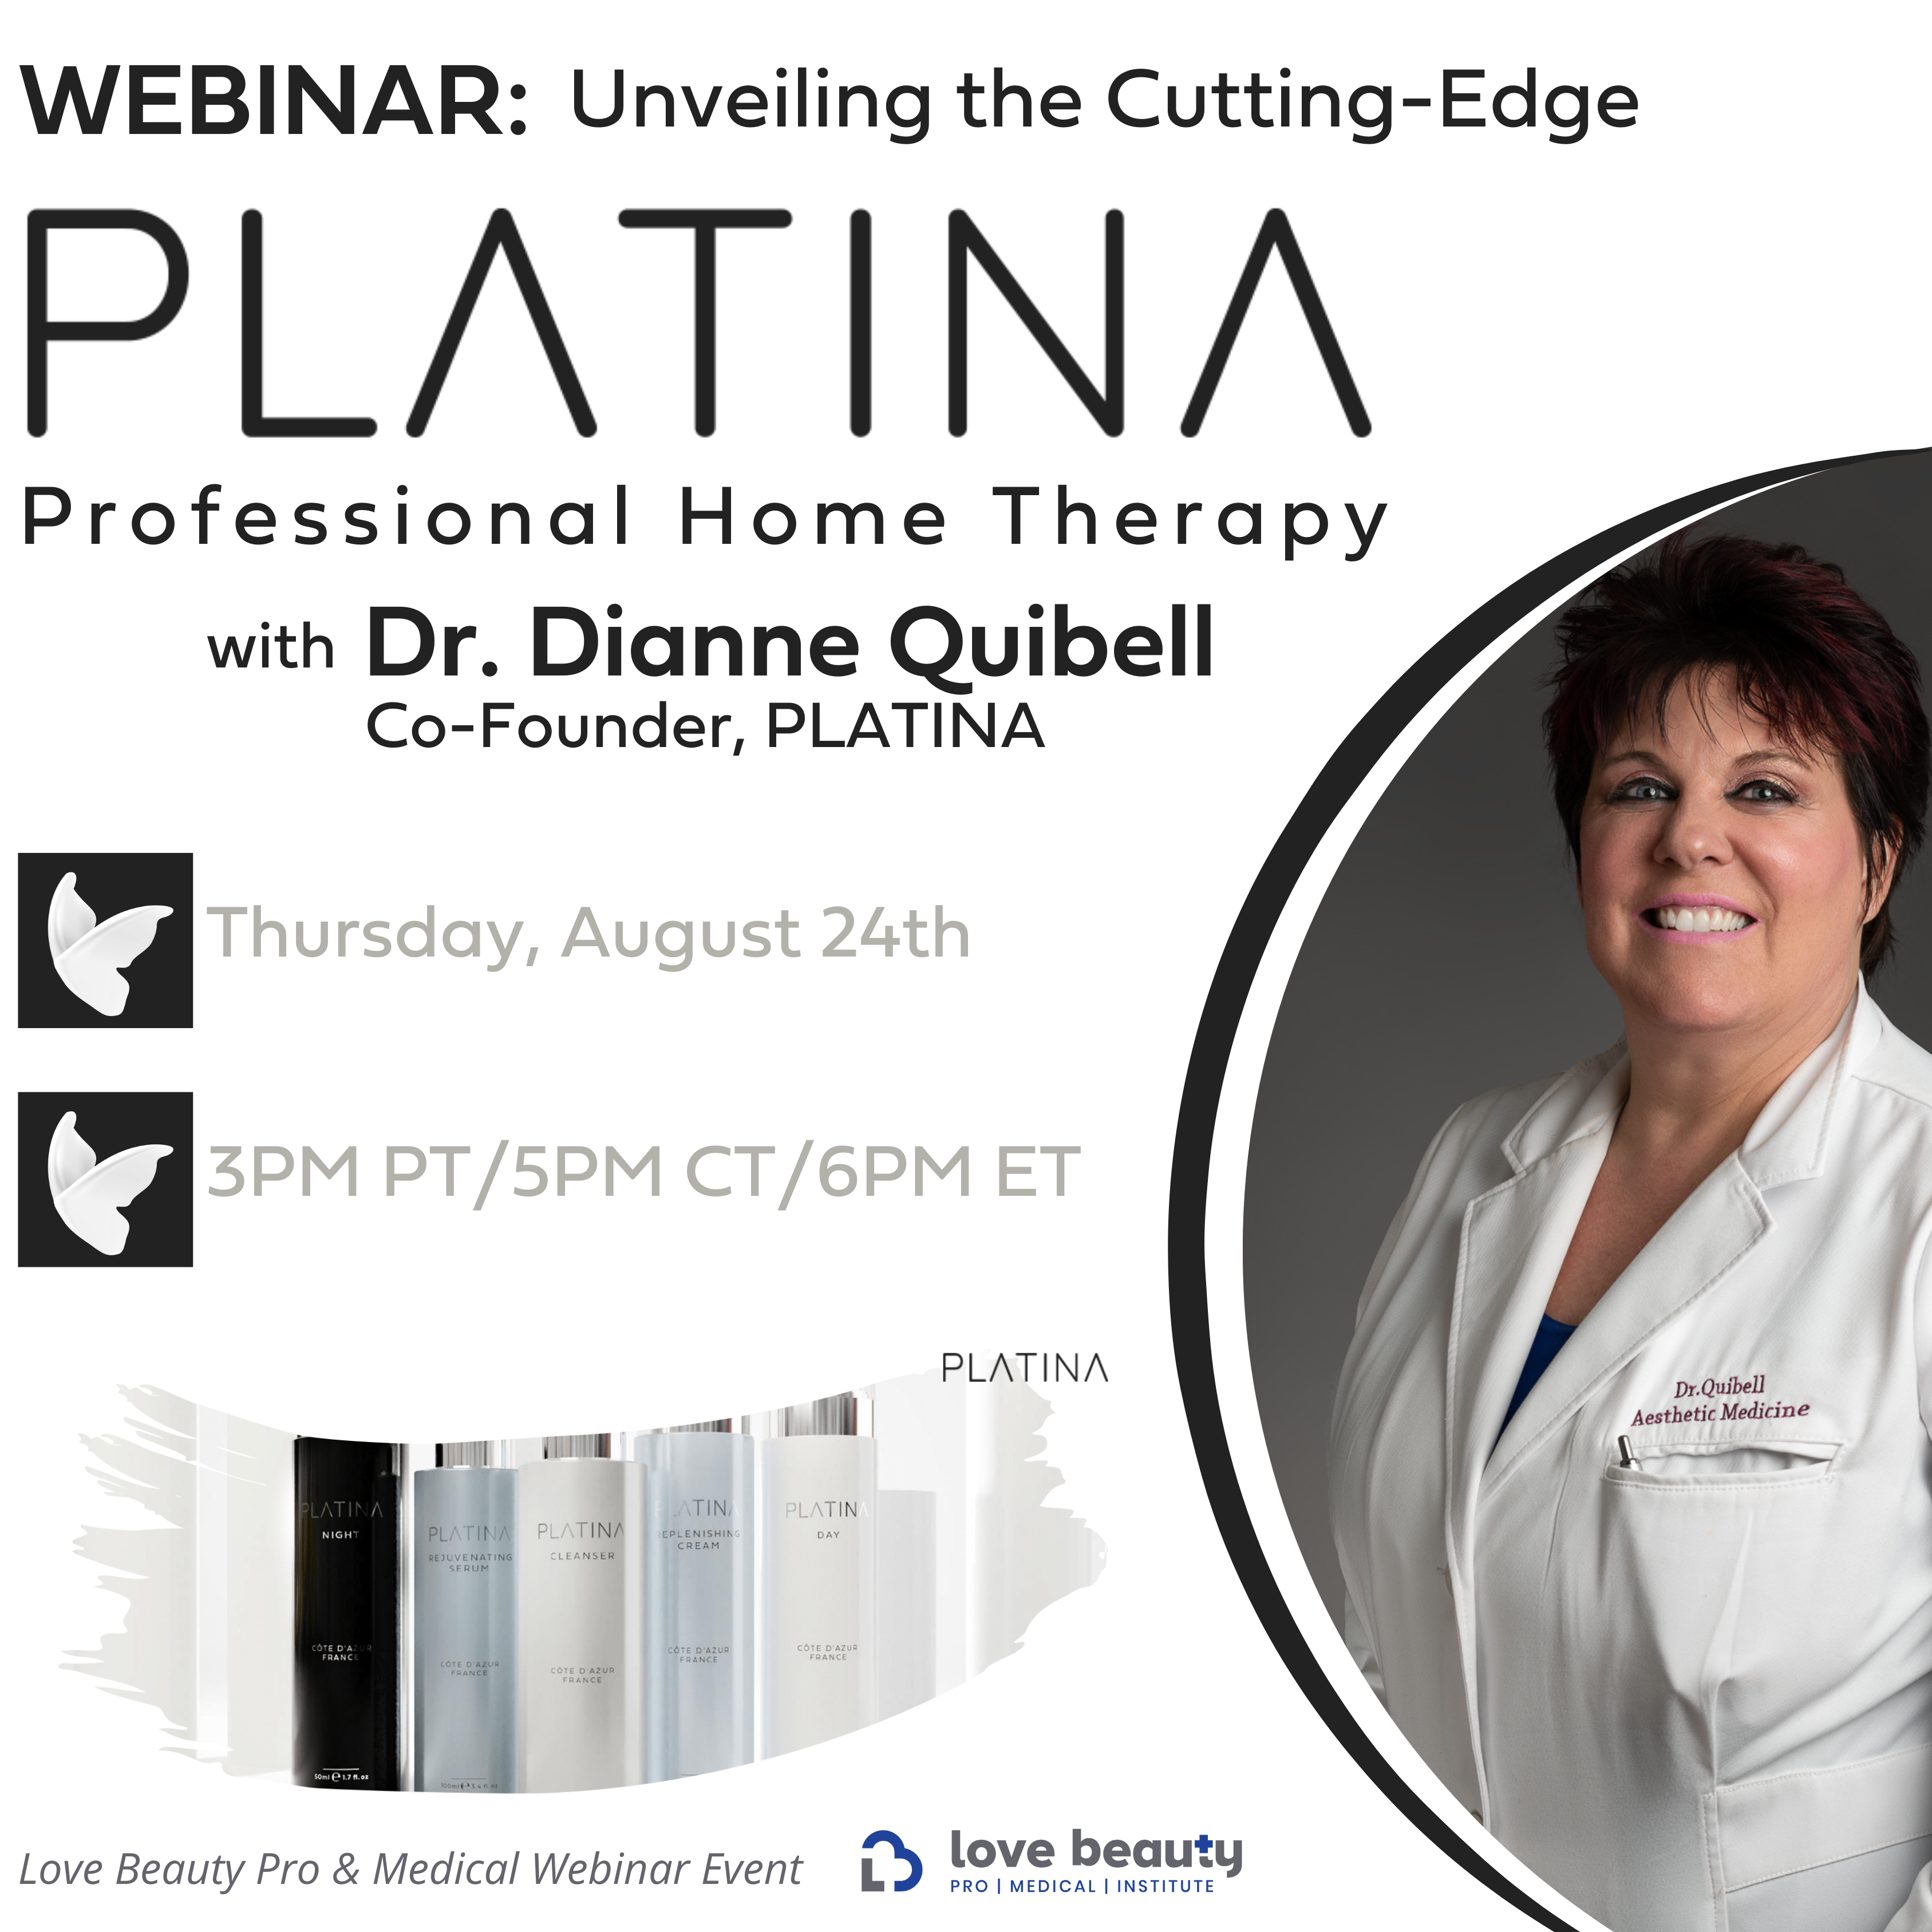 WEBINAR: Unveiling the Cutting-Edge PLATINA Professional Home Therapy with Co-Founder Dr. Dianne Quibell